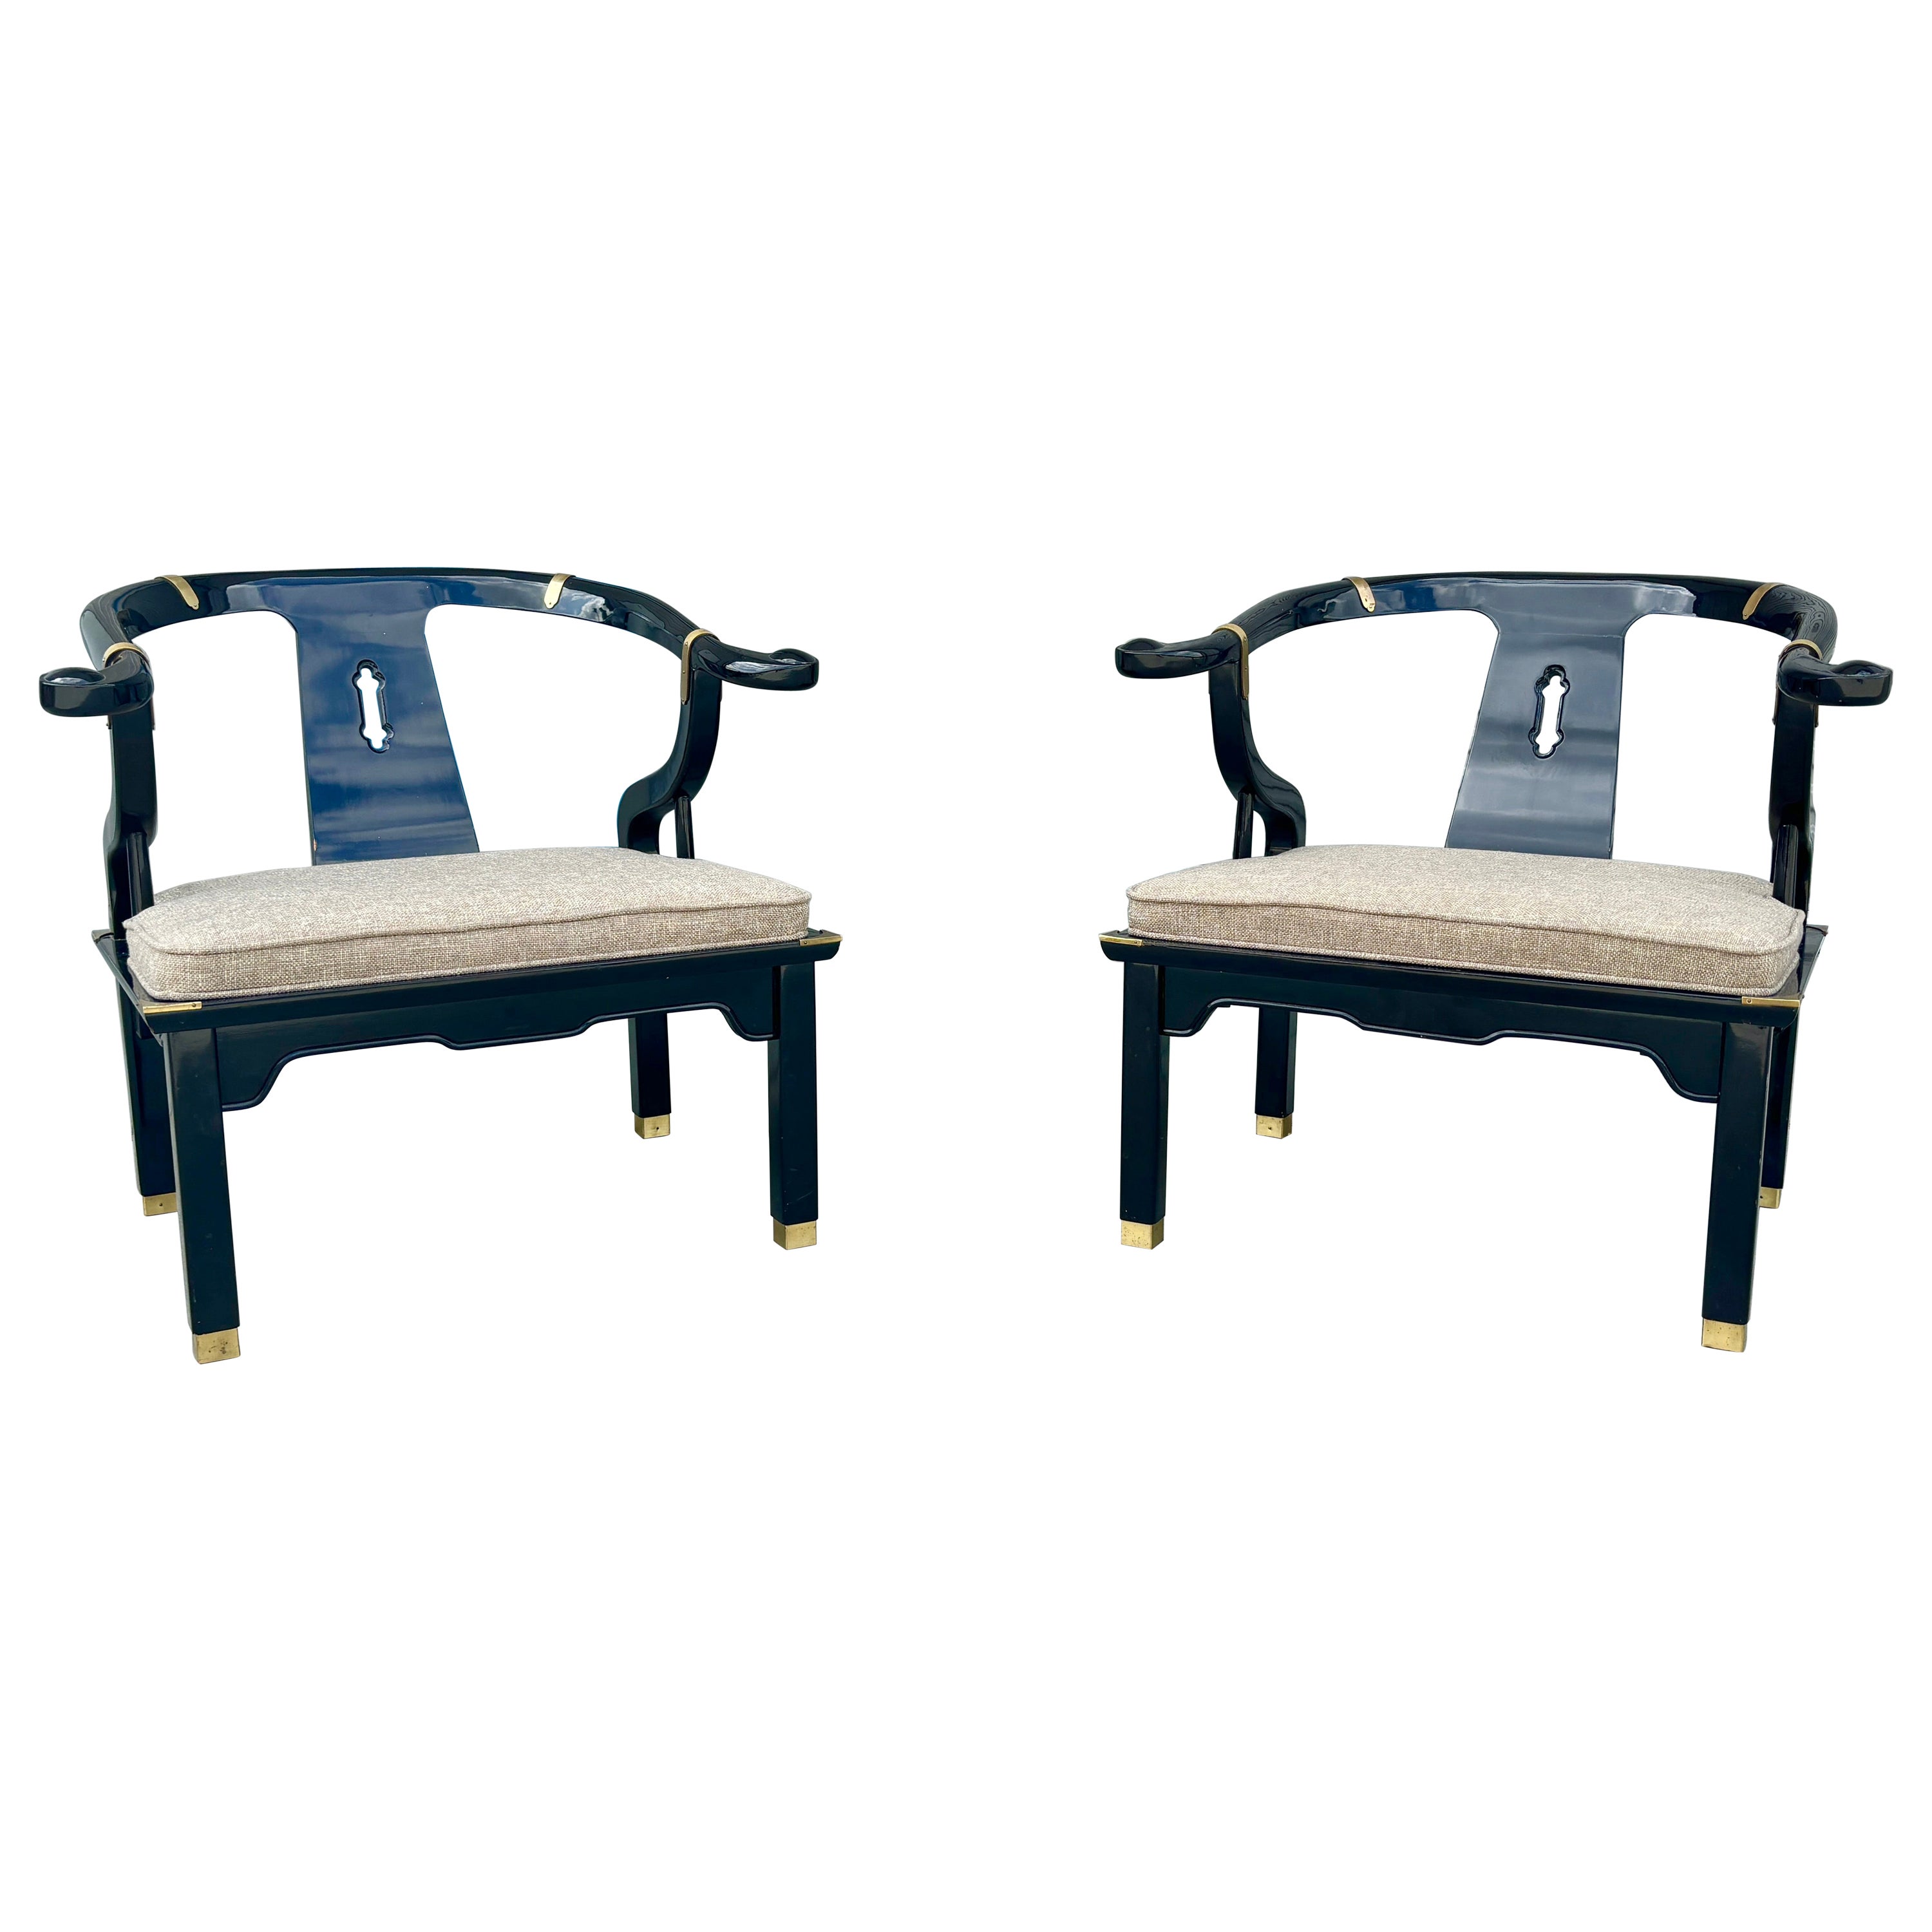 1970s Mid Century Lounge Chairs Styled After James Mont - Set of 2